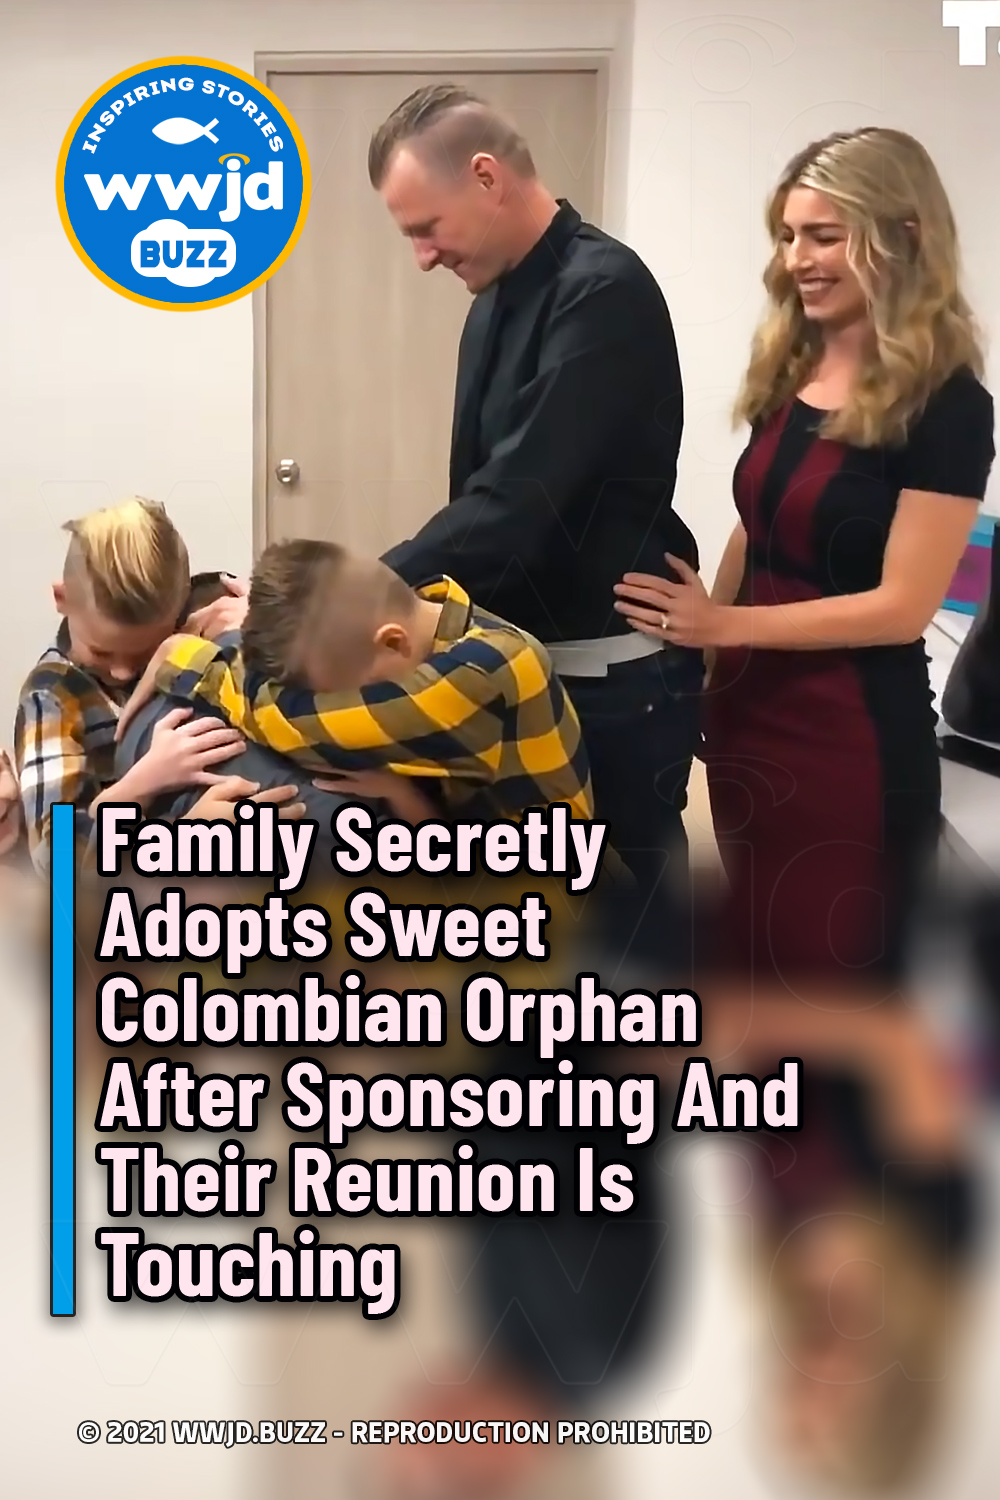 Family Secretly Adopts Sweet Colombian Orphan After Sponsoring And Their Reunion Is Touching